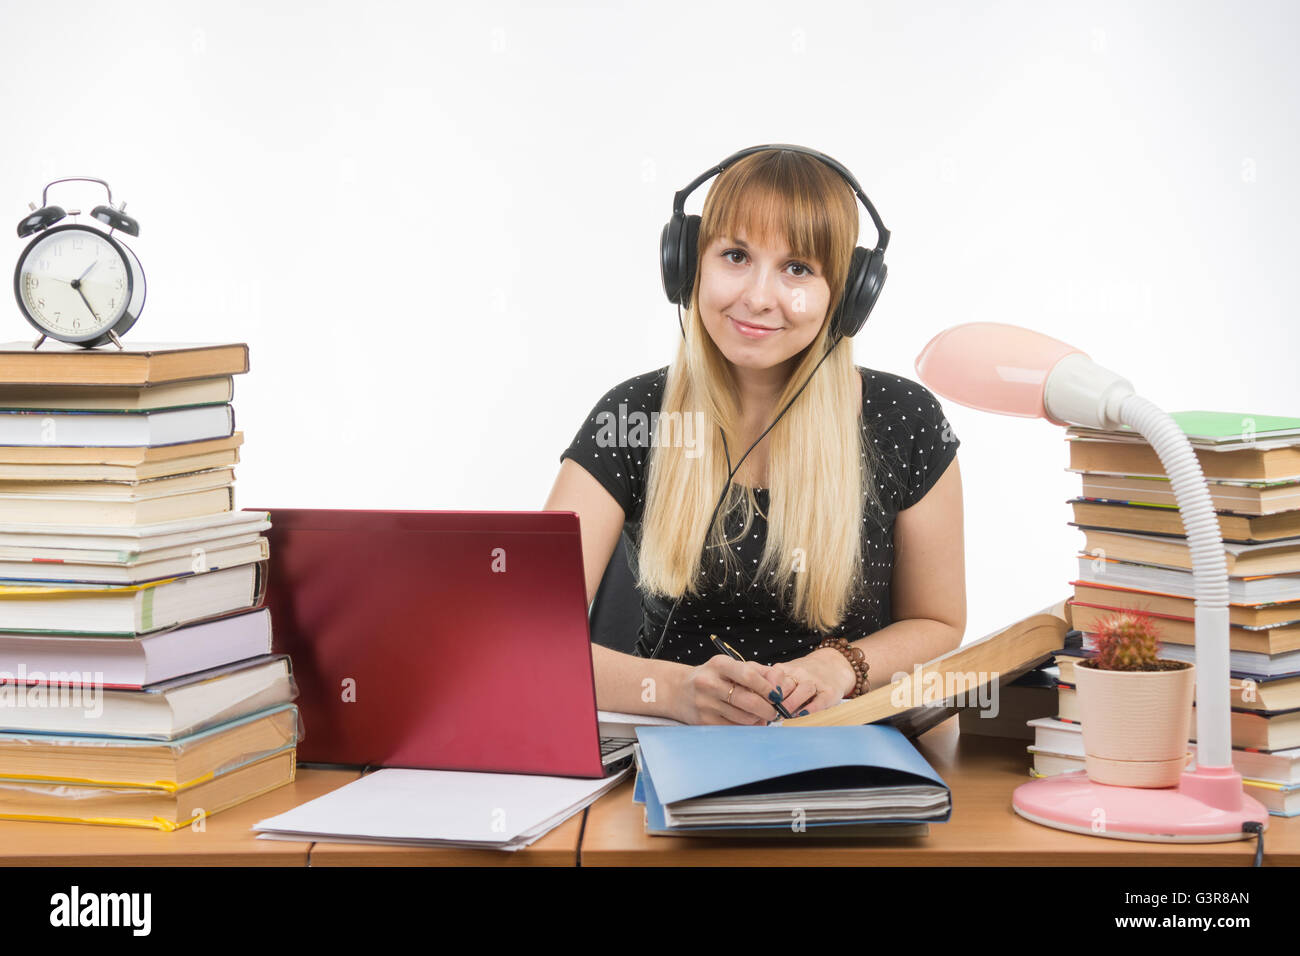 Student with headphones ready to pass the diploma project looked into the frame Stock Photo